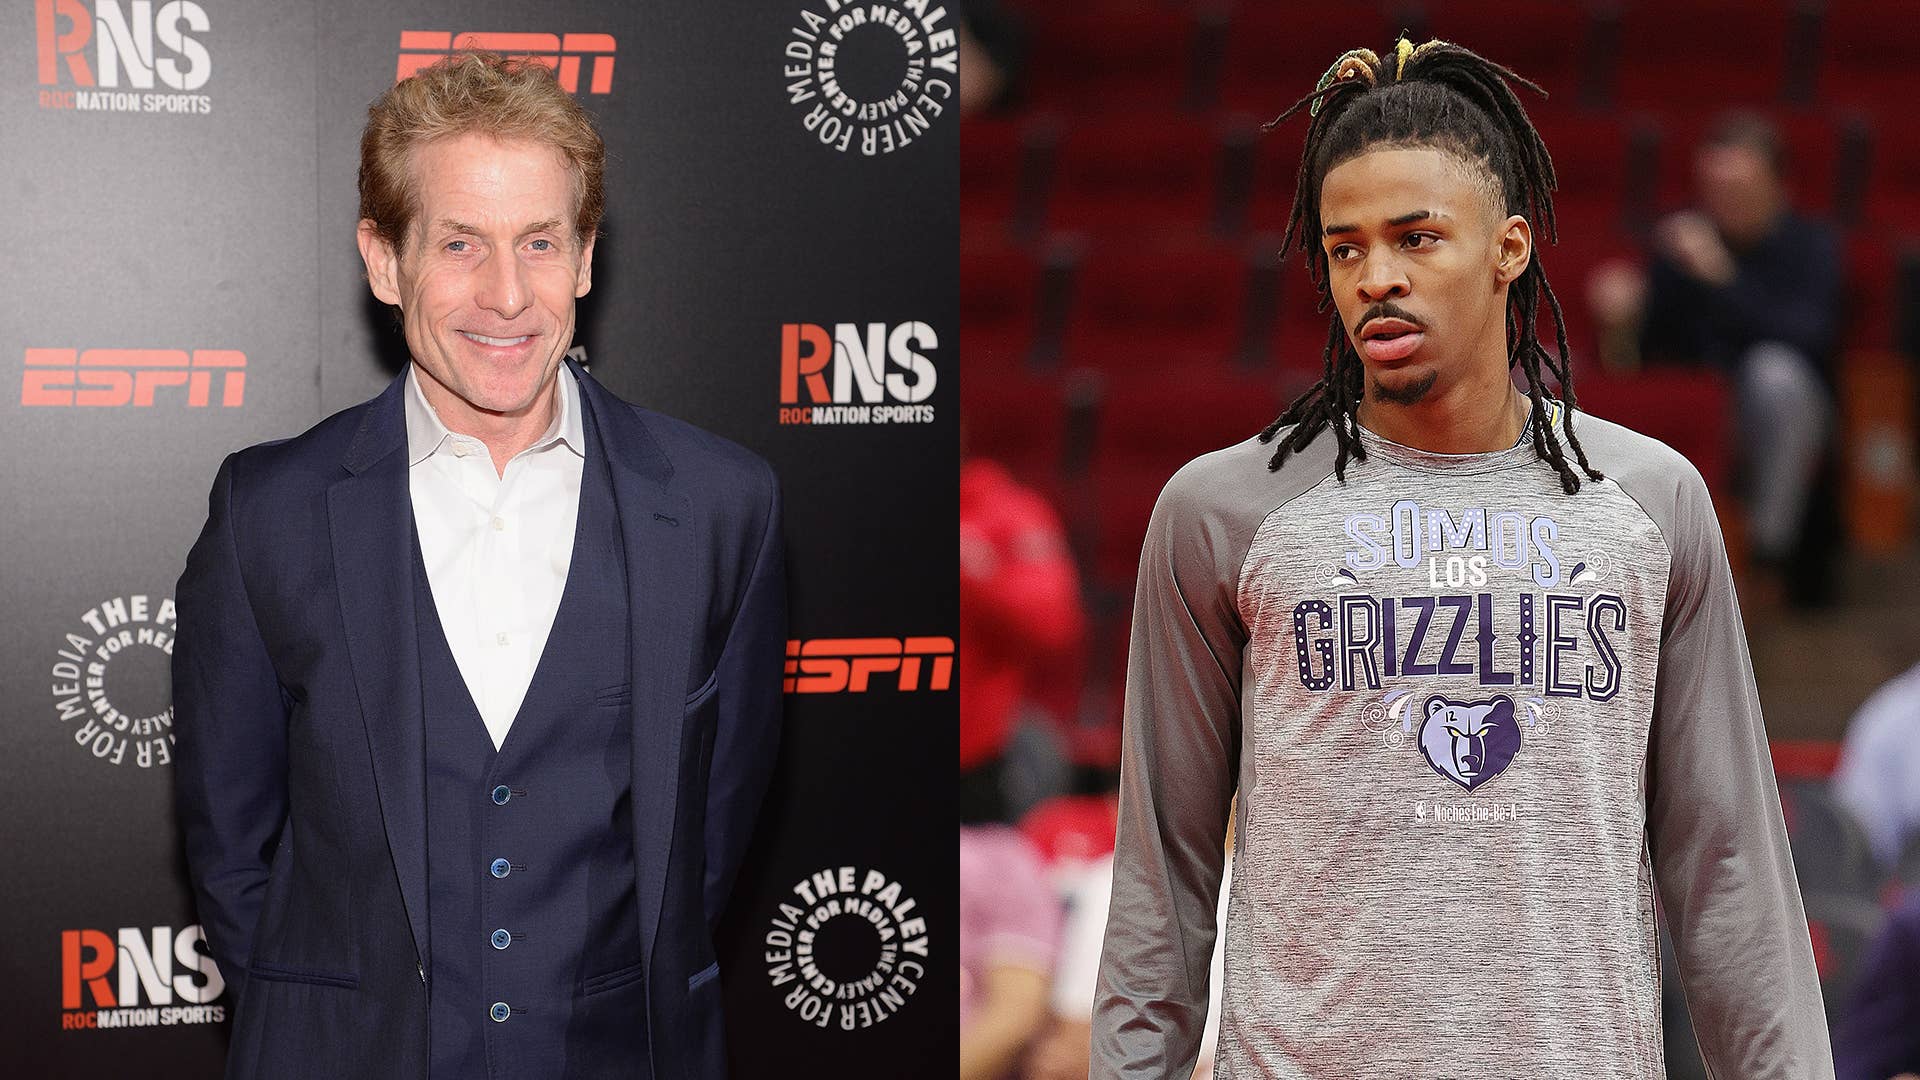 Skip Bayless and Ja Morant of the Memphis Grizzlies in a splice image